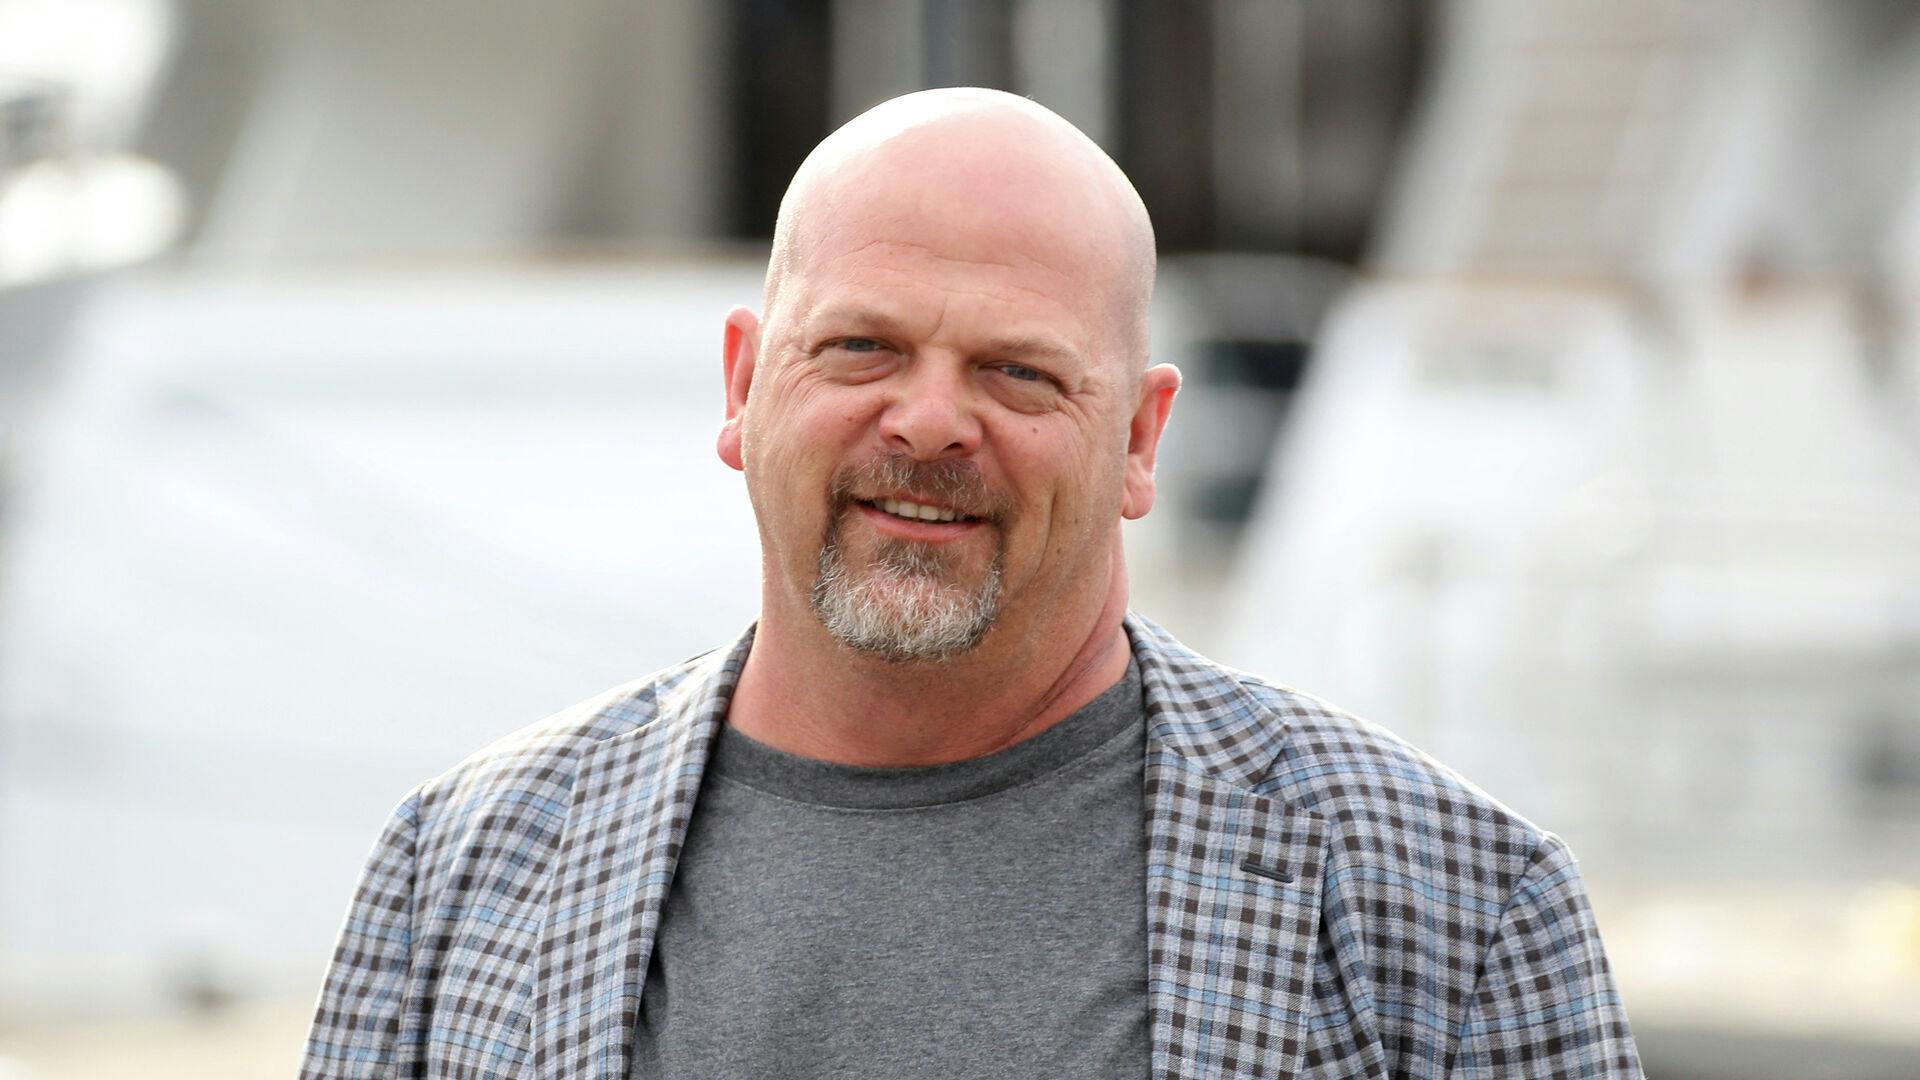 US businessman and reality television personality Rick Harrison poses during a photocall for the TV serie "Pawn Stars" as part of the MIPCOM (The world's entertainment content market), on October 17, 2016 in Cannes, southeastern France. VALERY HACHE / AFP